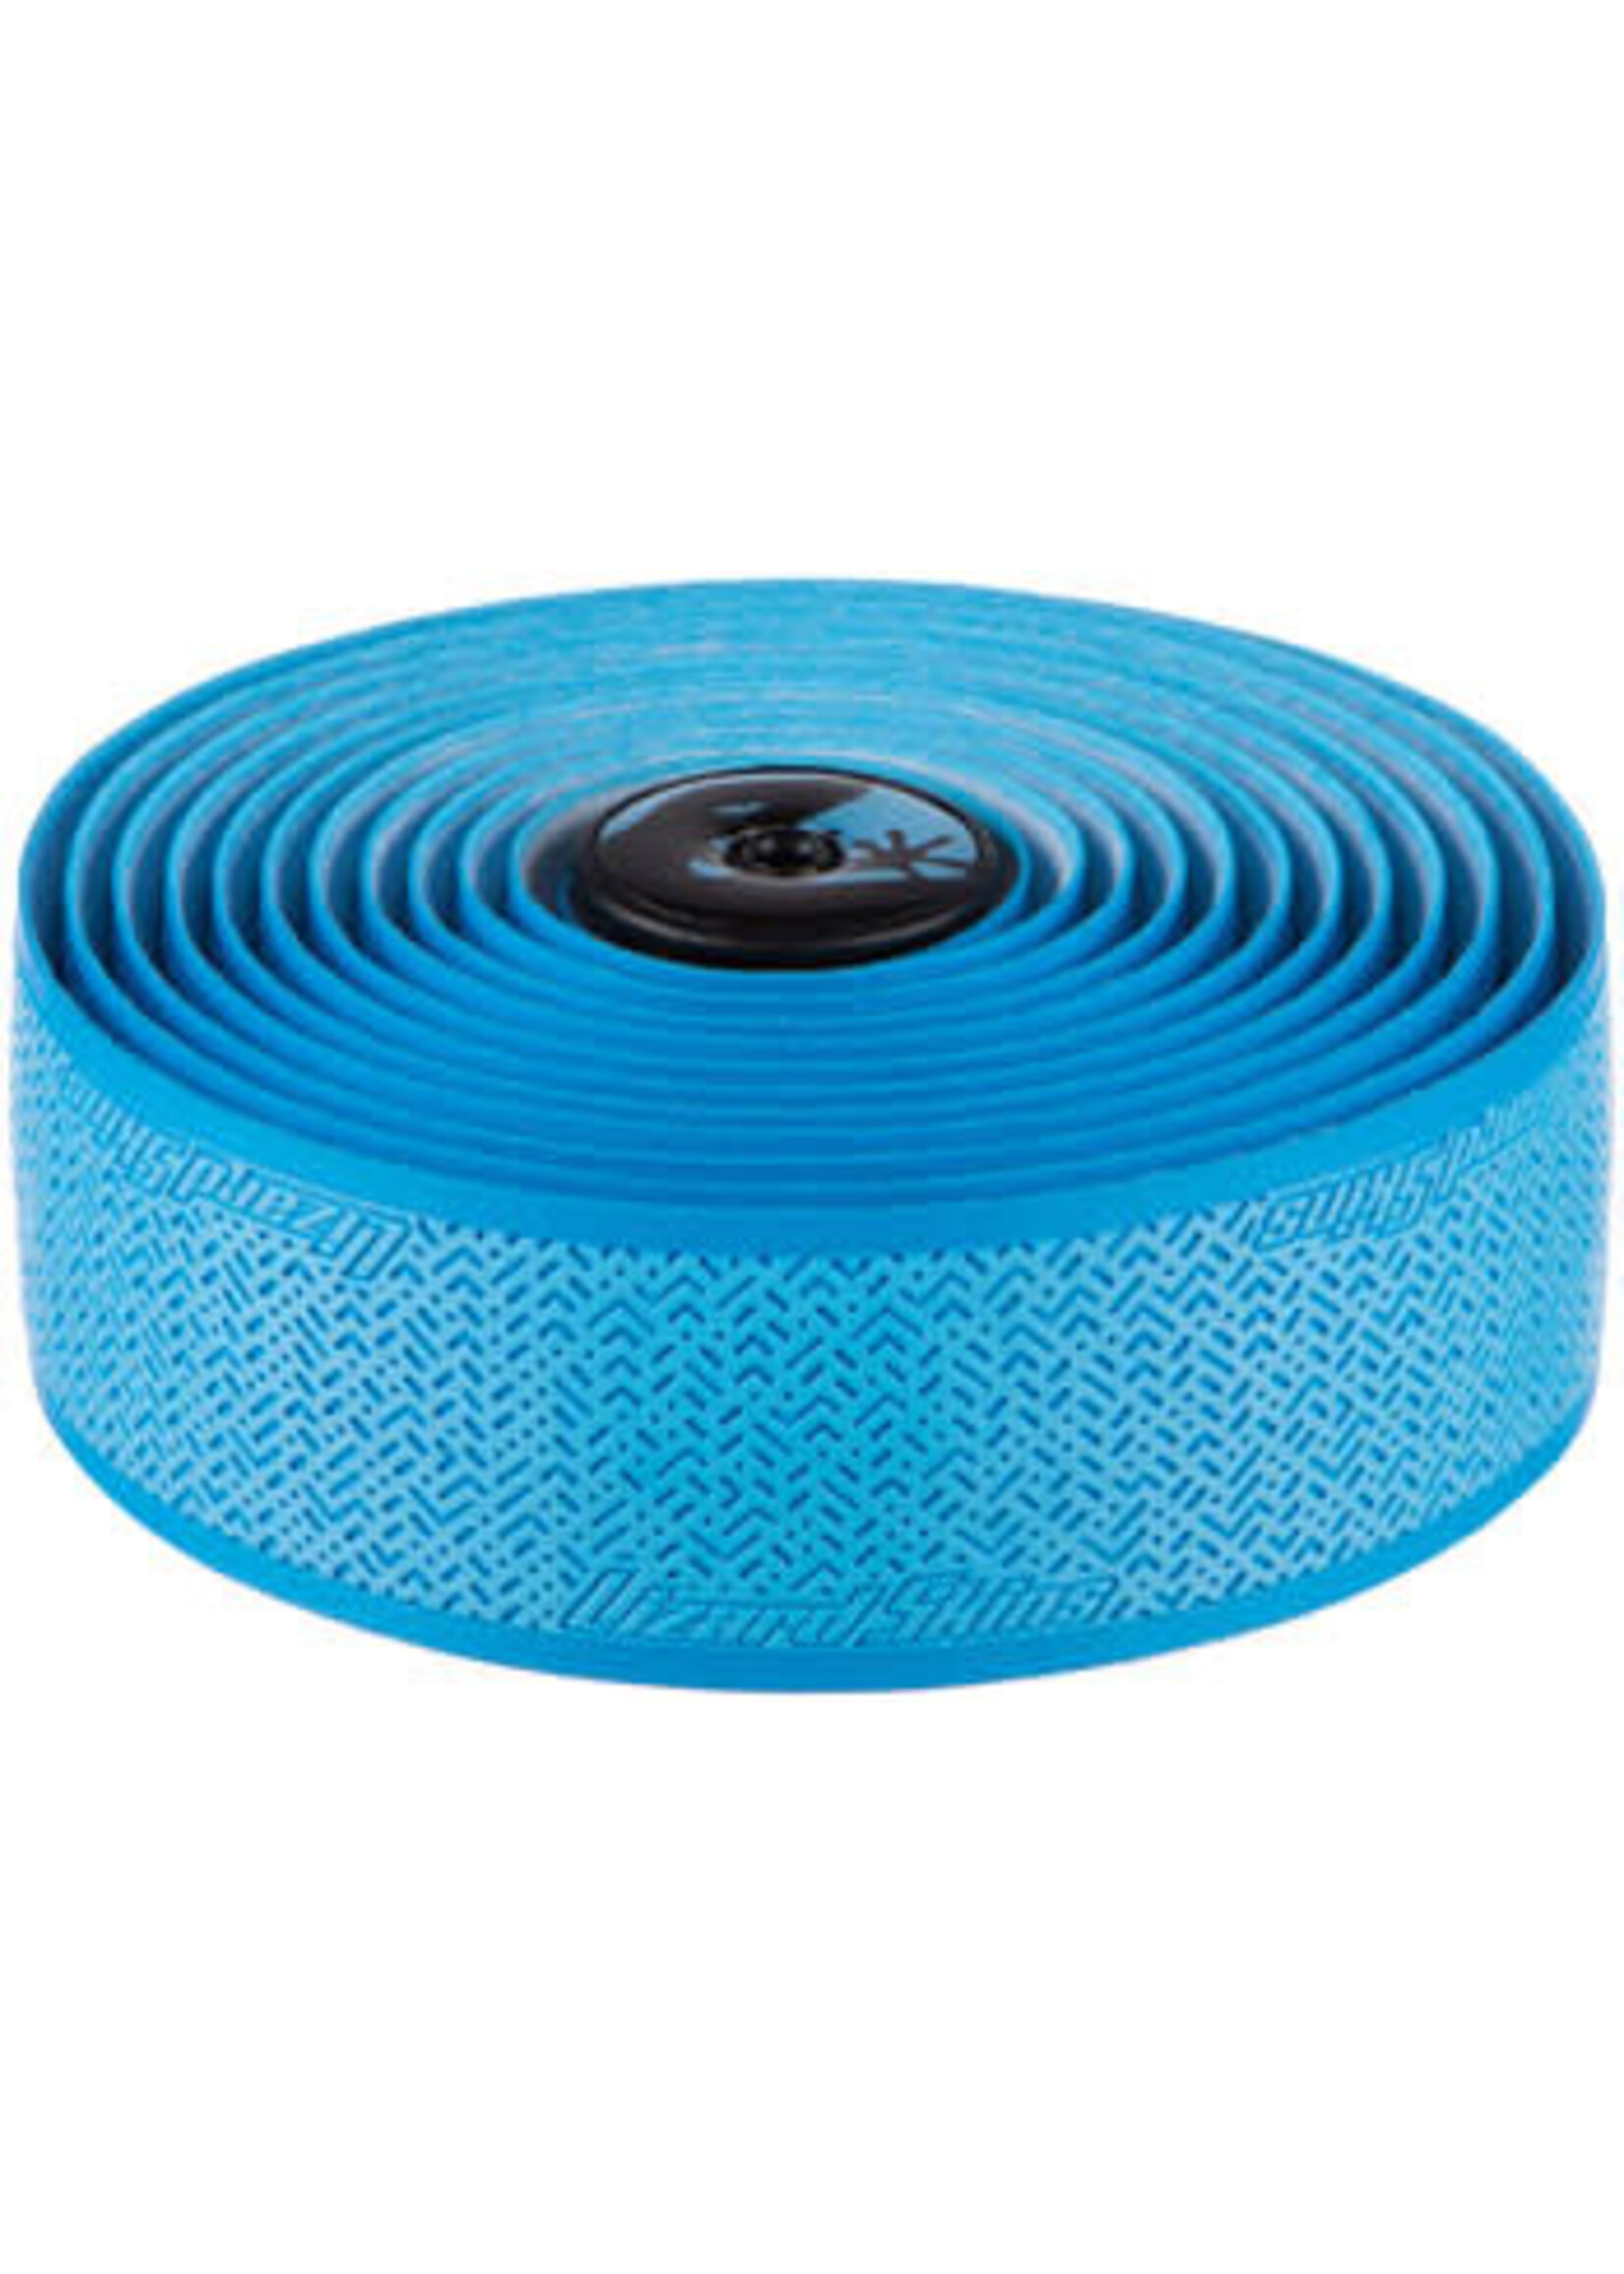 Lizard Skins Lizard Skins Bar Tape V2-Multiple Colors and Thicknesses